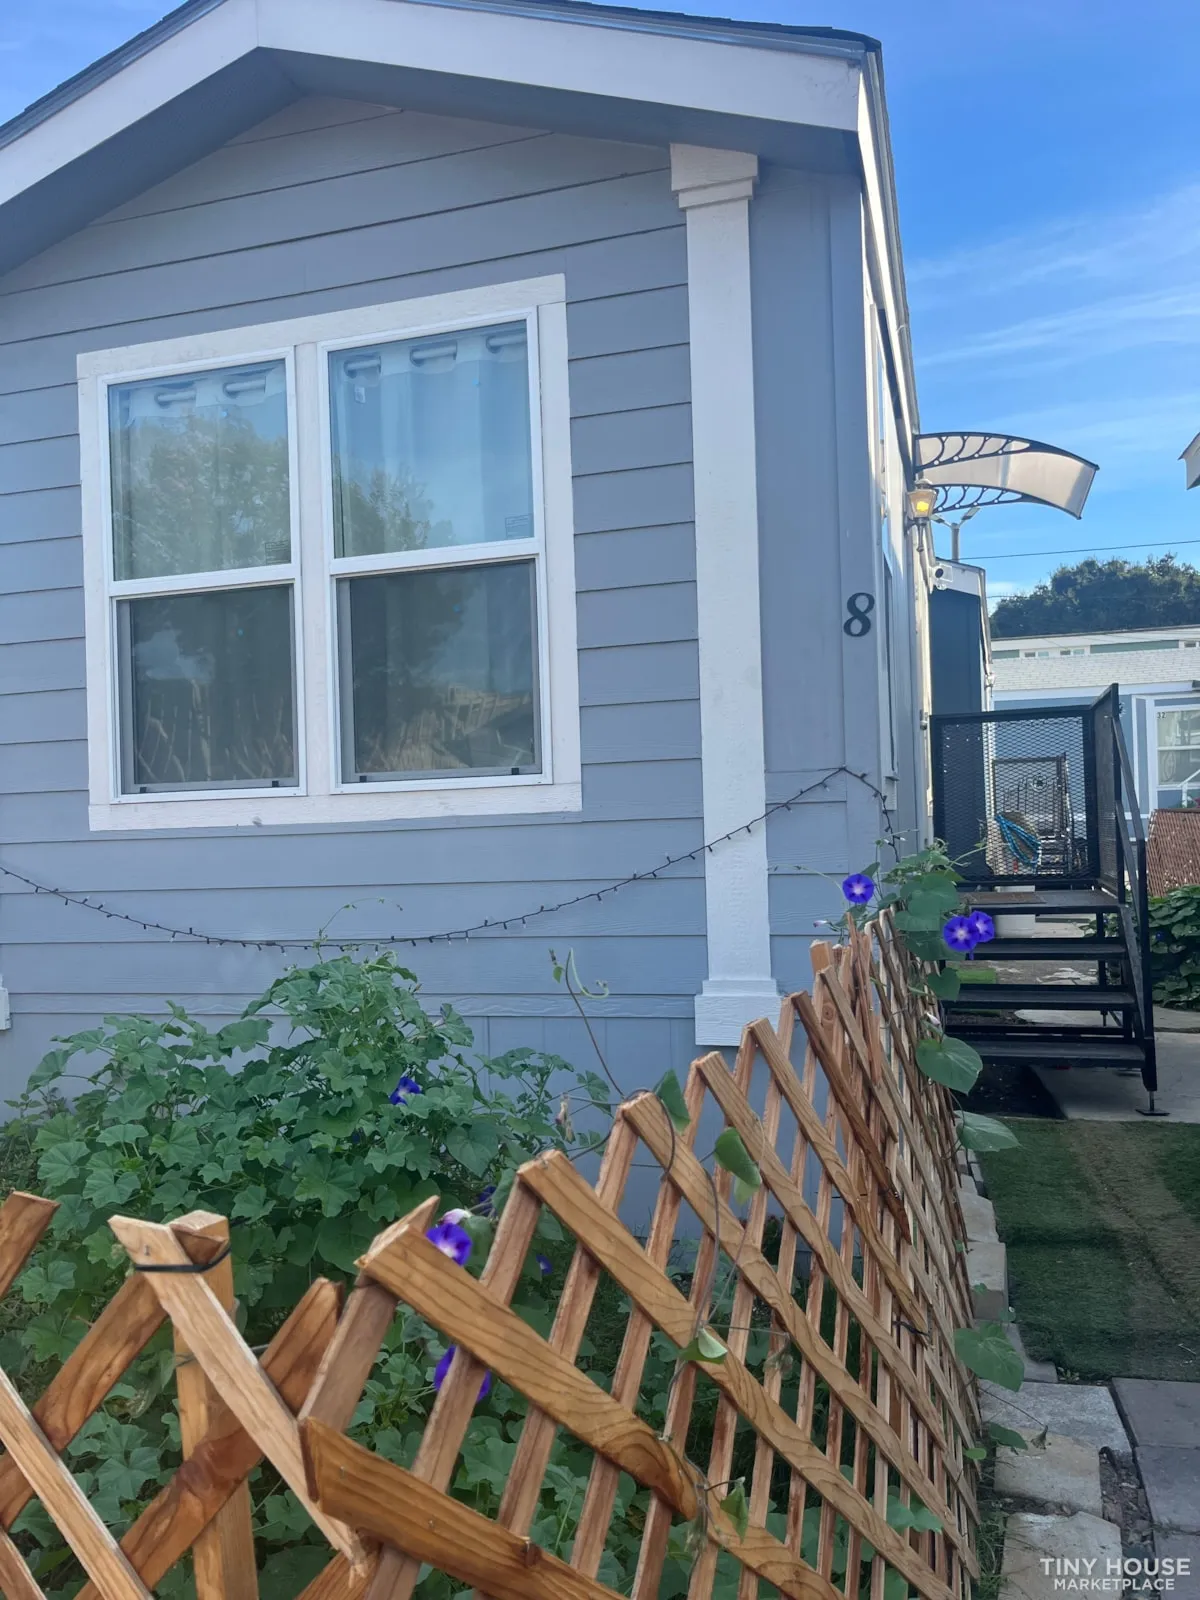 Tiny houses beginning to make an impact in East Bay